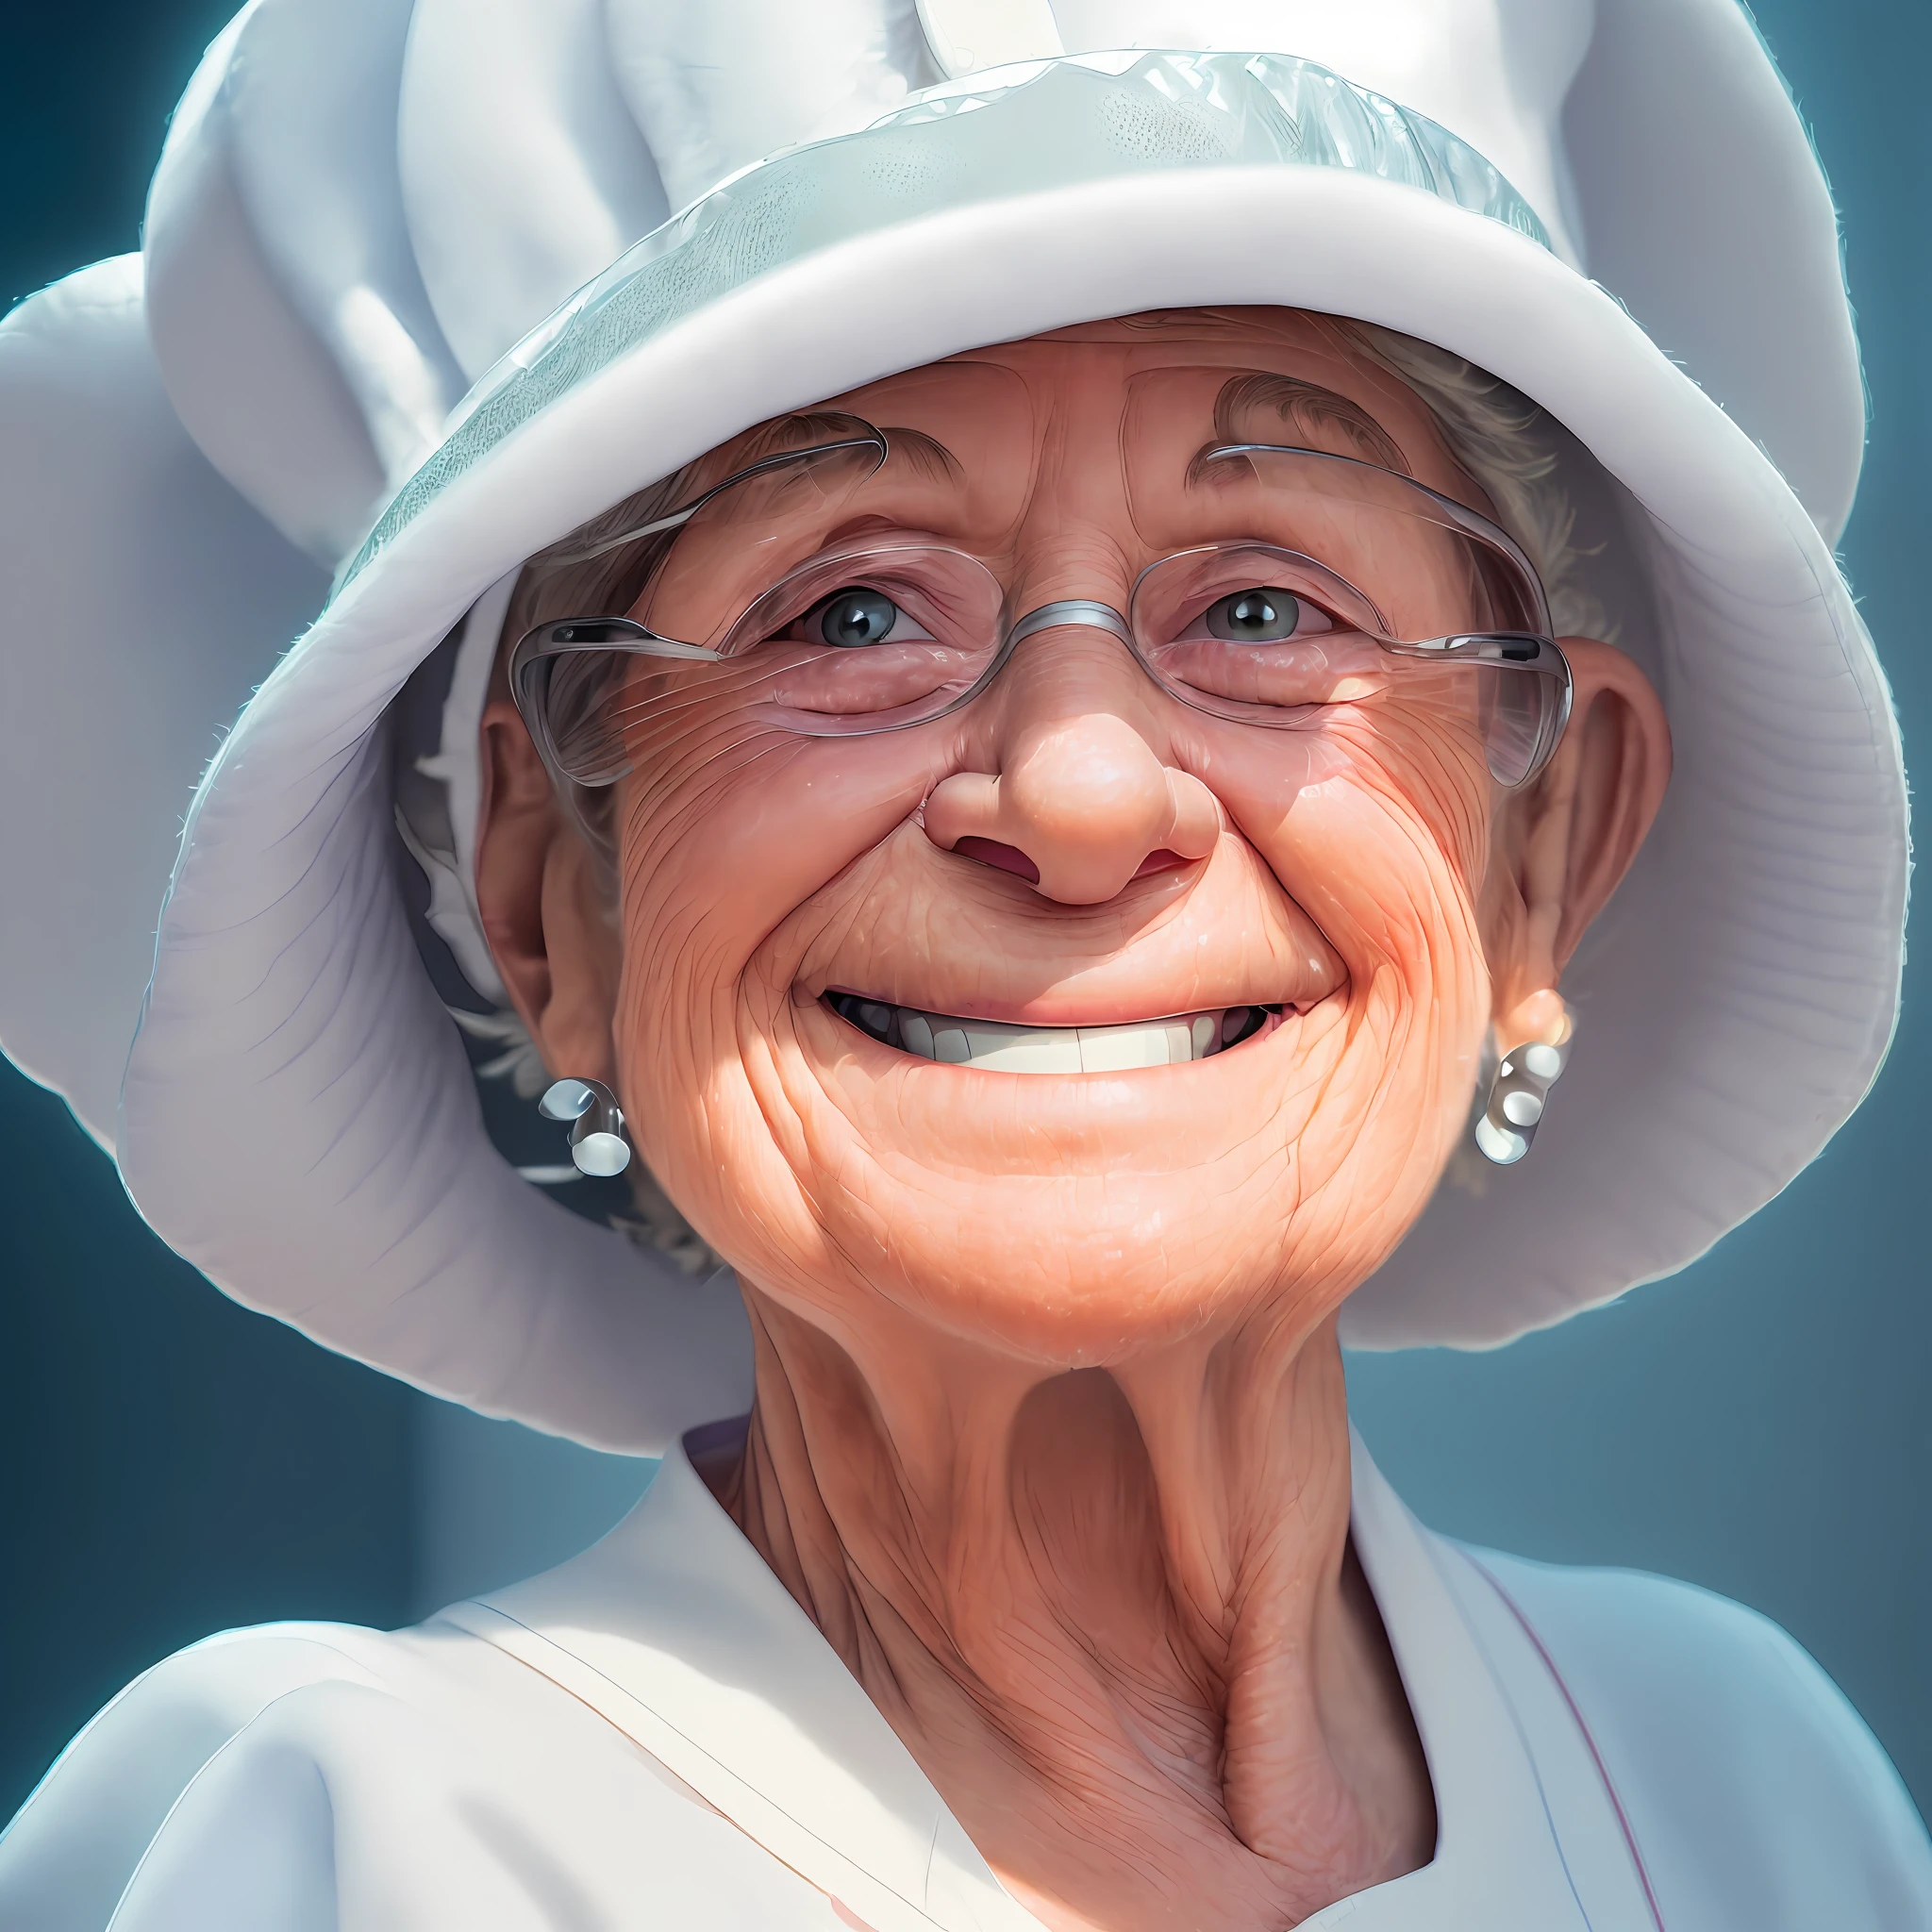 ((best quality)) (detailed) (high resolution and sharpness:1.4) (cute grandma smiling in white cook outfit and hat:1.8), (latin:1.5), (chef outfit and hat:1.4), (close-up:1.4), (centered:1.5), (against dark background:1.3), (looking into camera lens:1.4), (bright eyes:1.3), (window lighting:1.4), (lighting studio perfect:1.3), (sharp focus:1.4), (high resolution photography:1.2), ultra detailed, highly detailed, (high definition:1.2), (perfect composition:1.2), intricate, (cute and beautiful:1.3), award-winning photography, professional color grading, (in pixar style:1.5)